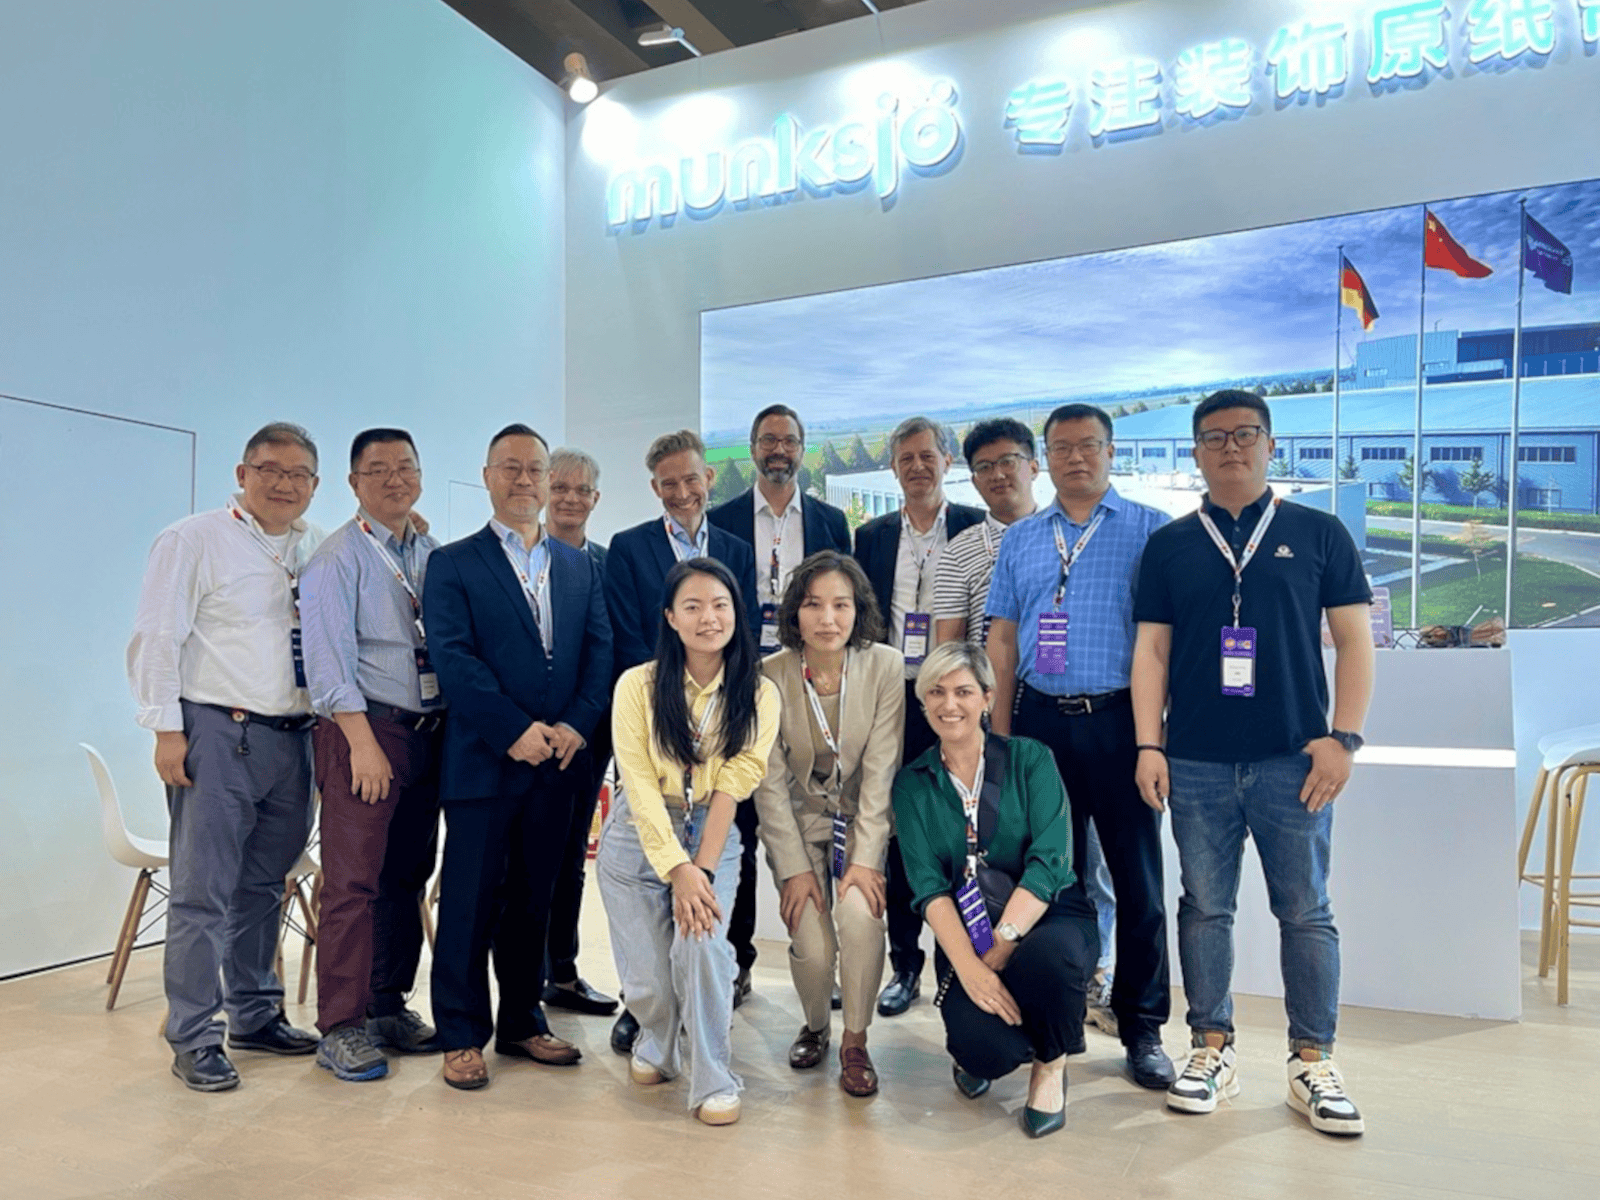 Munksjö participates at the Smart Event and the Interzum Guangzhou in China